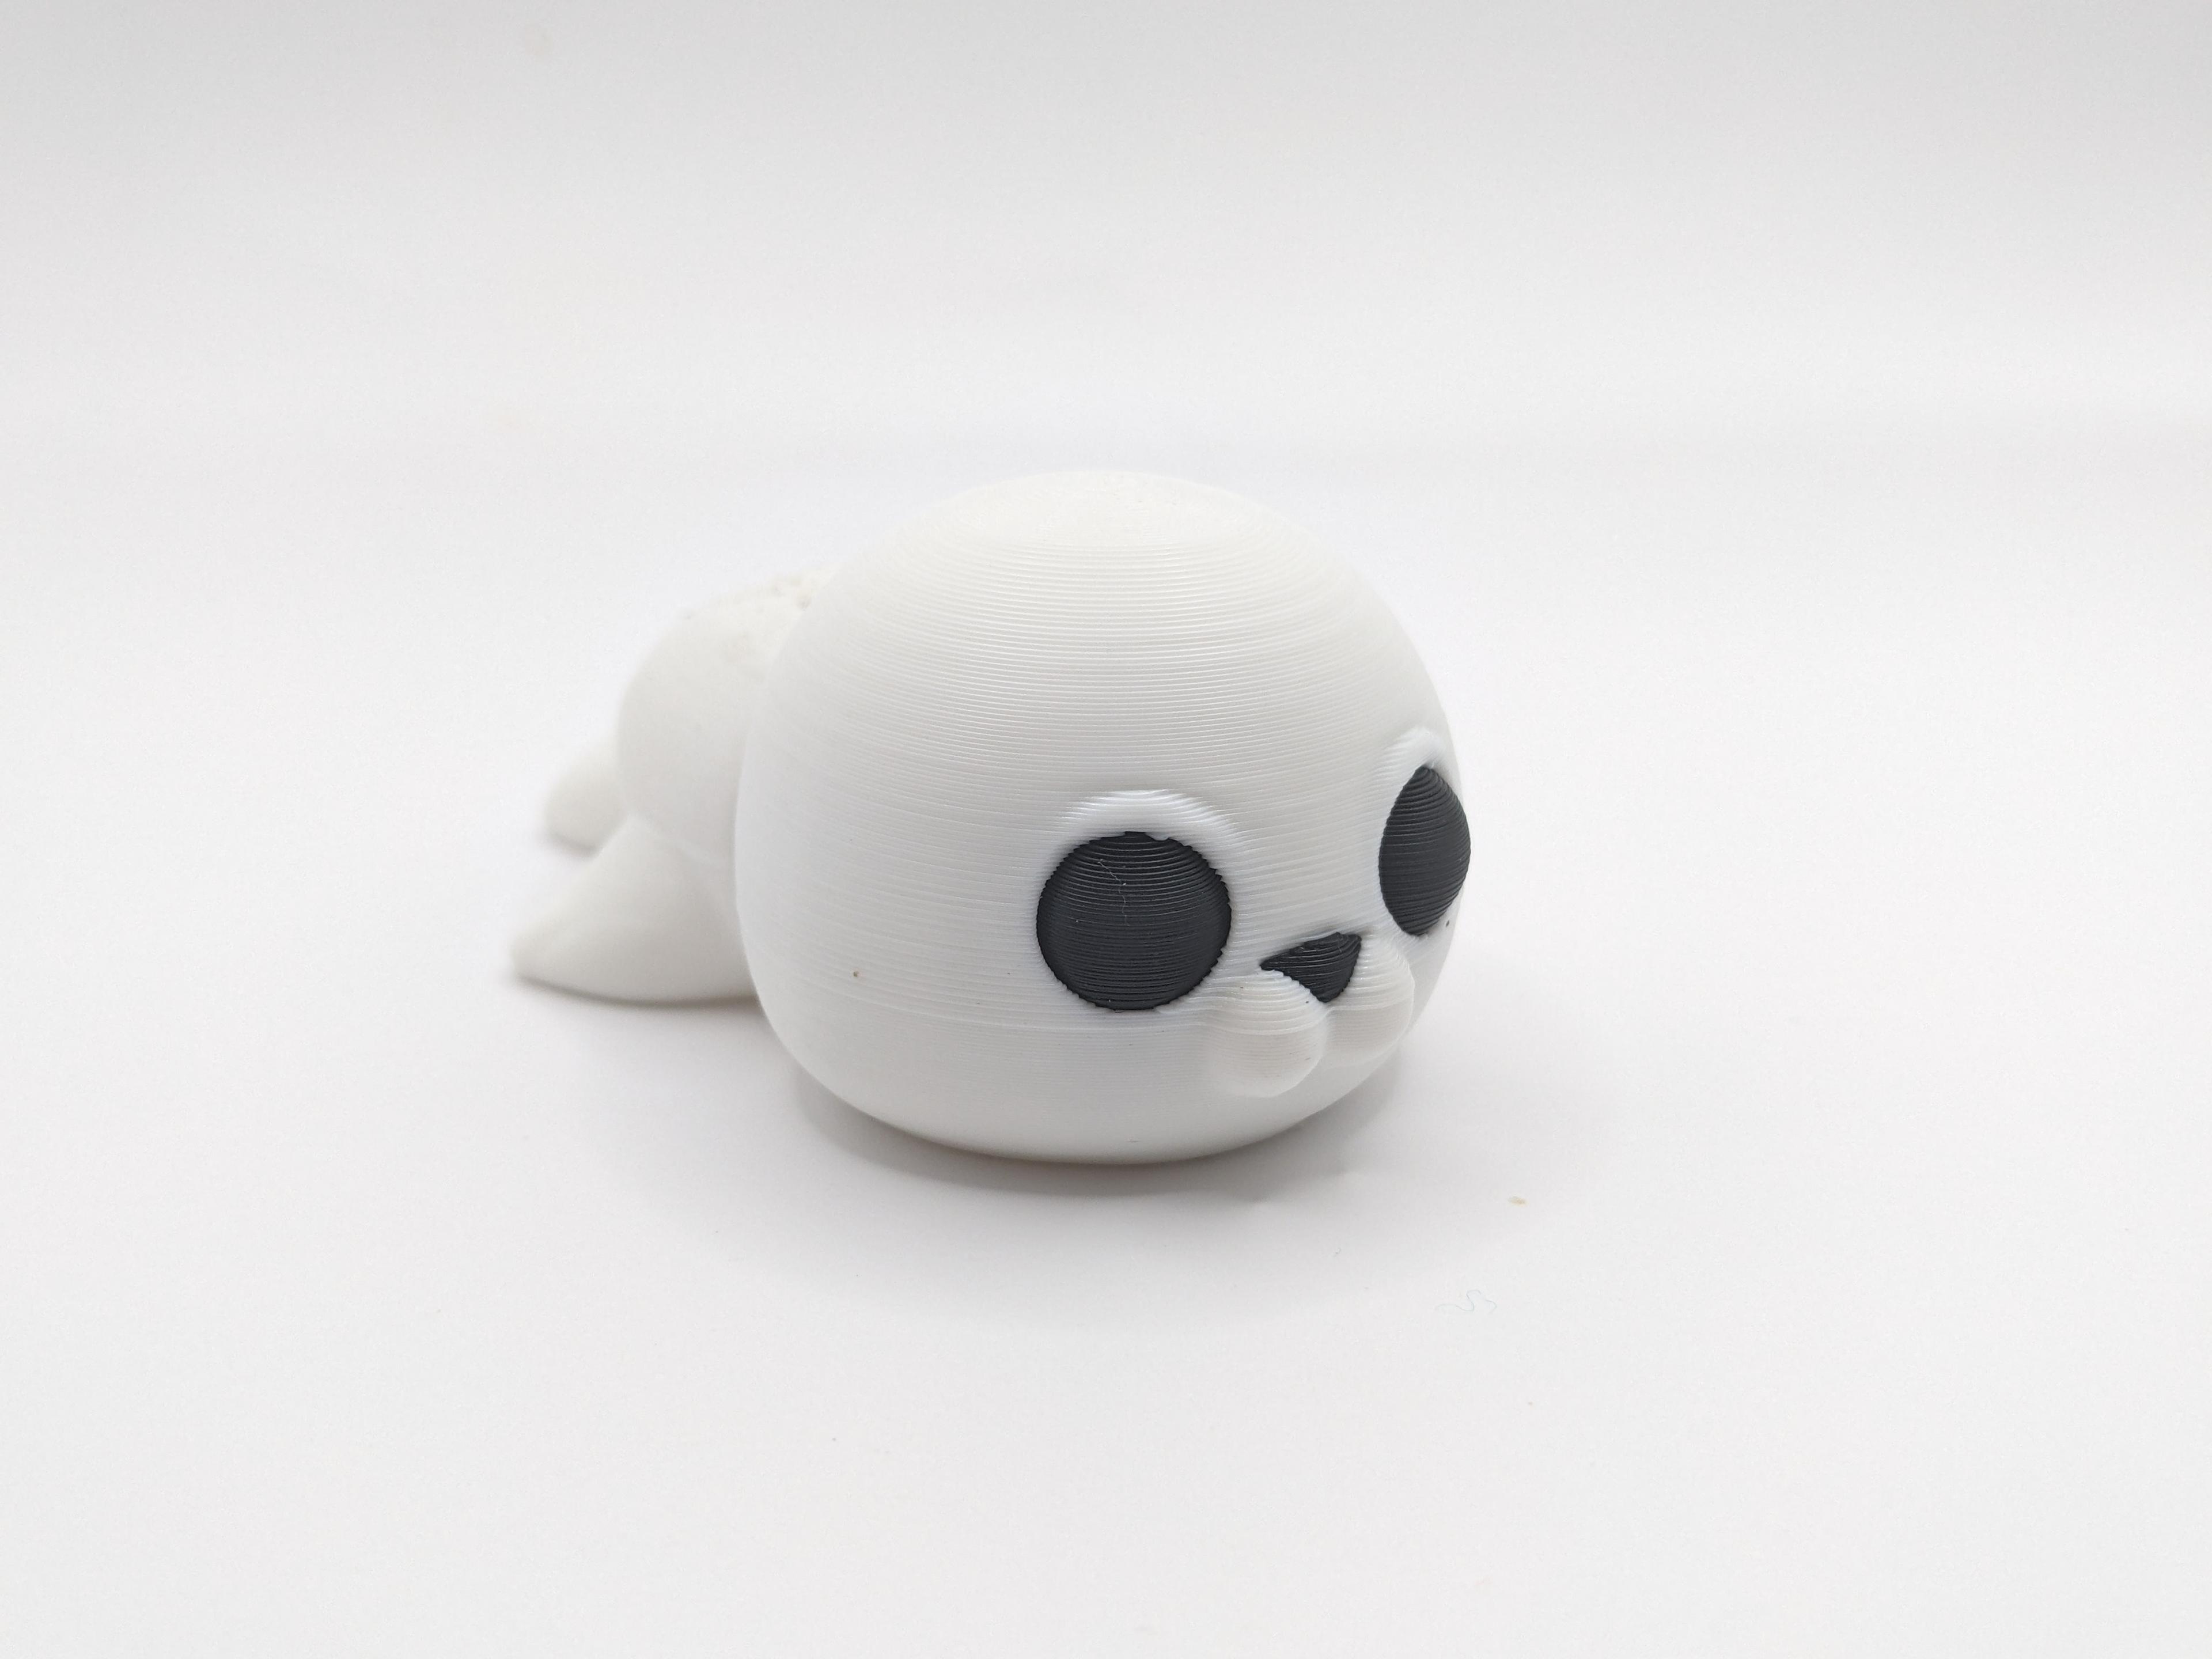 Baby Seal Articulated 3d model